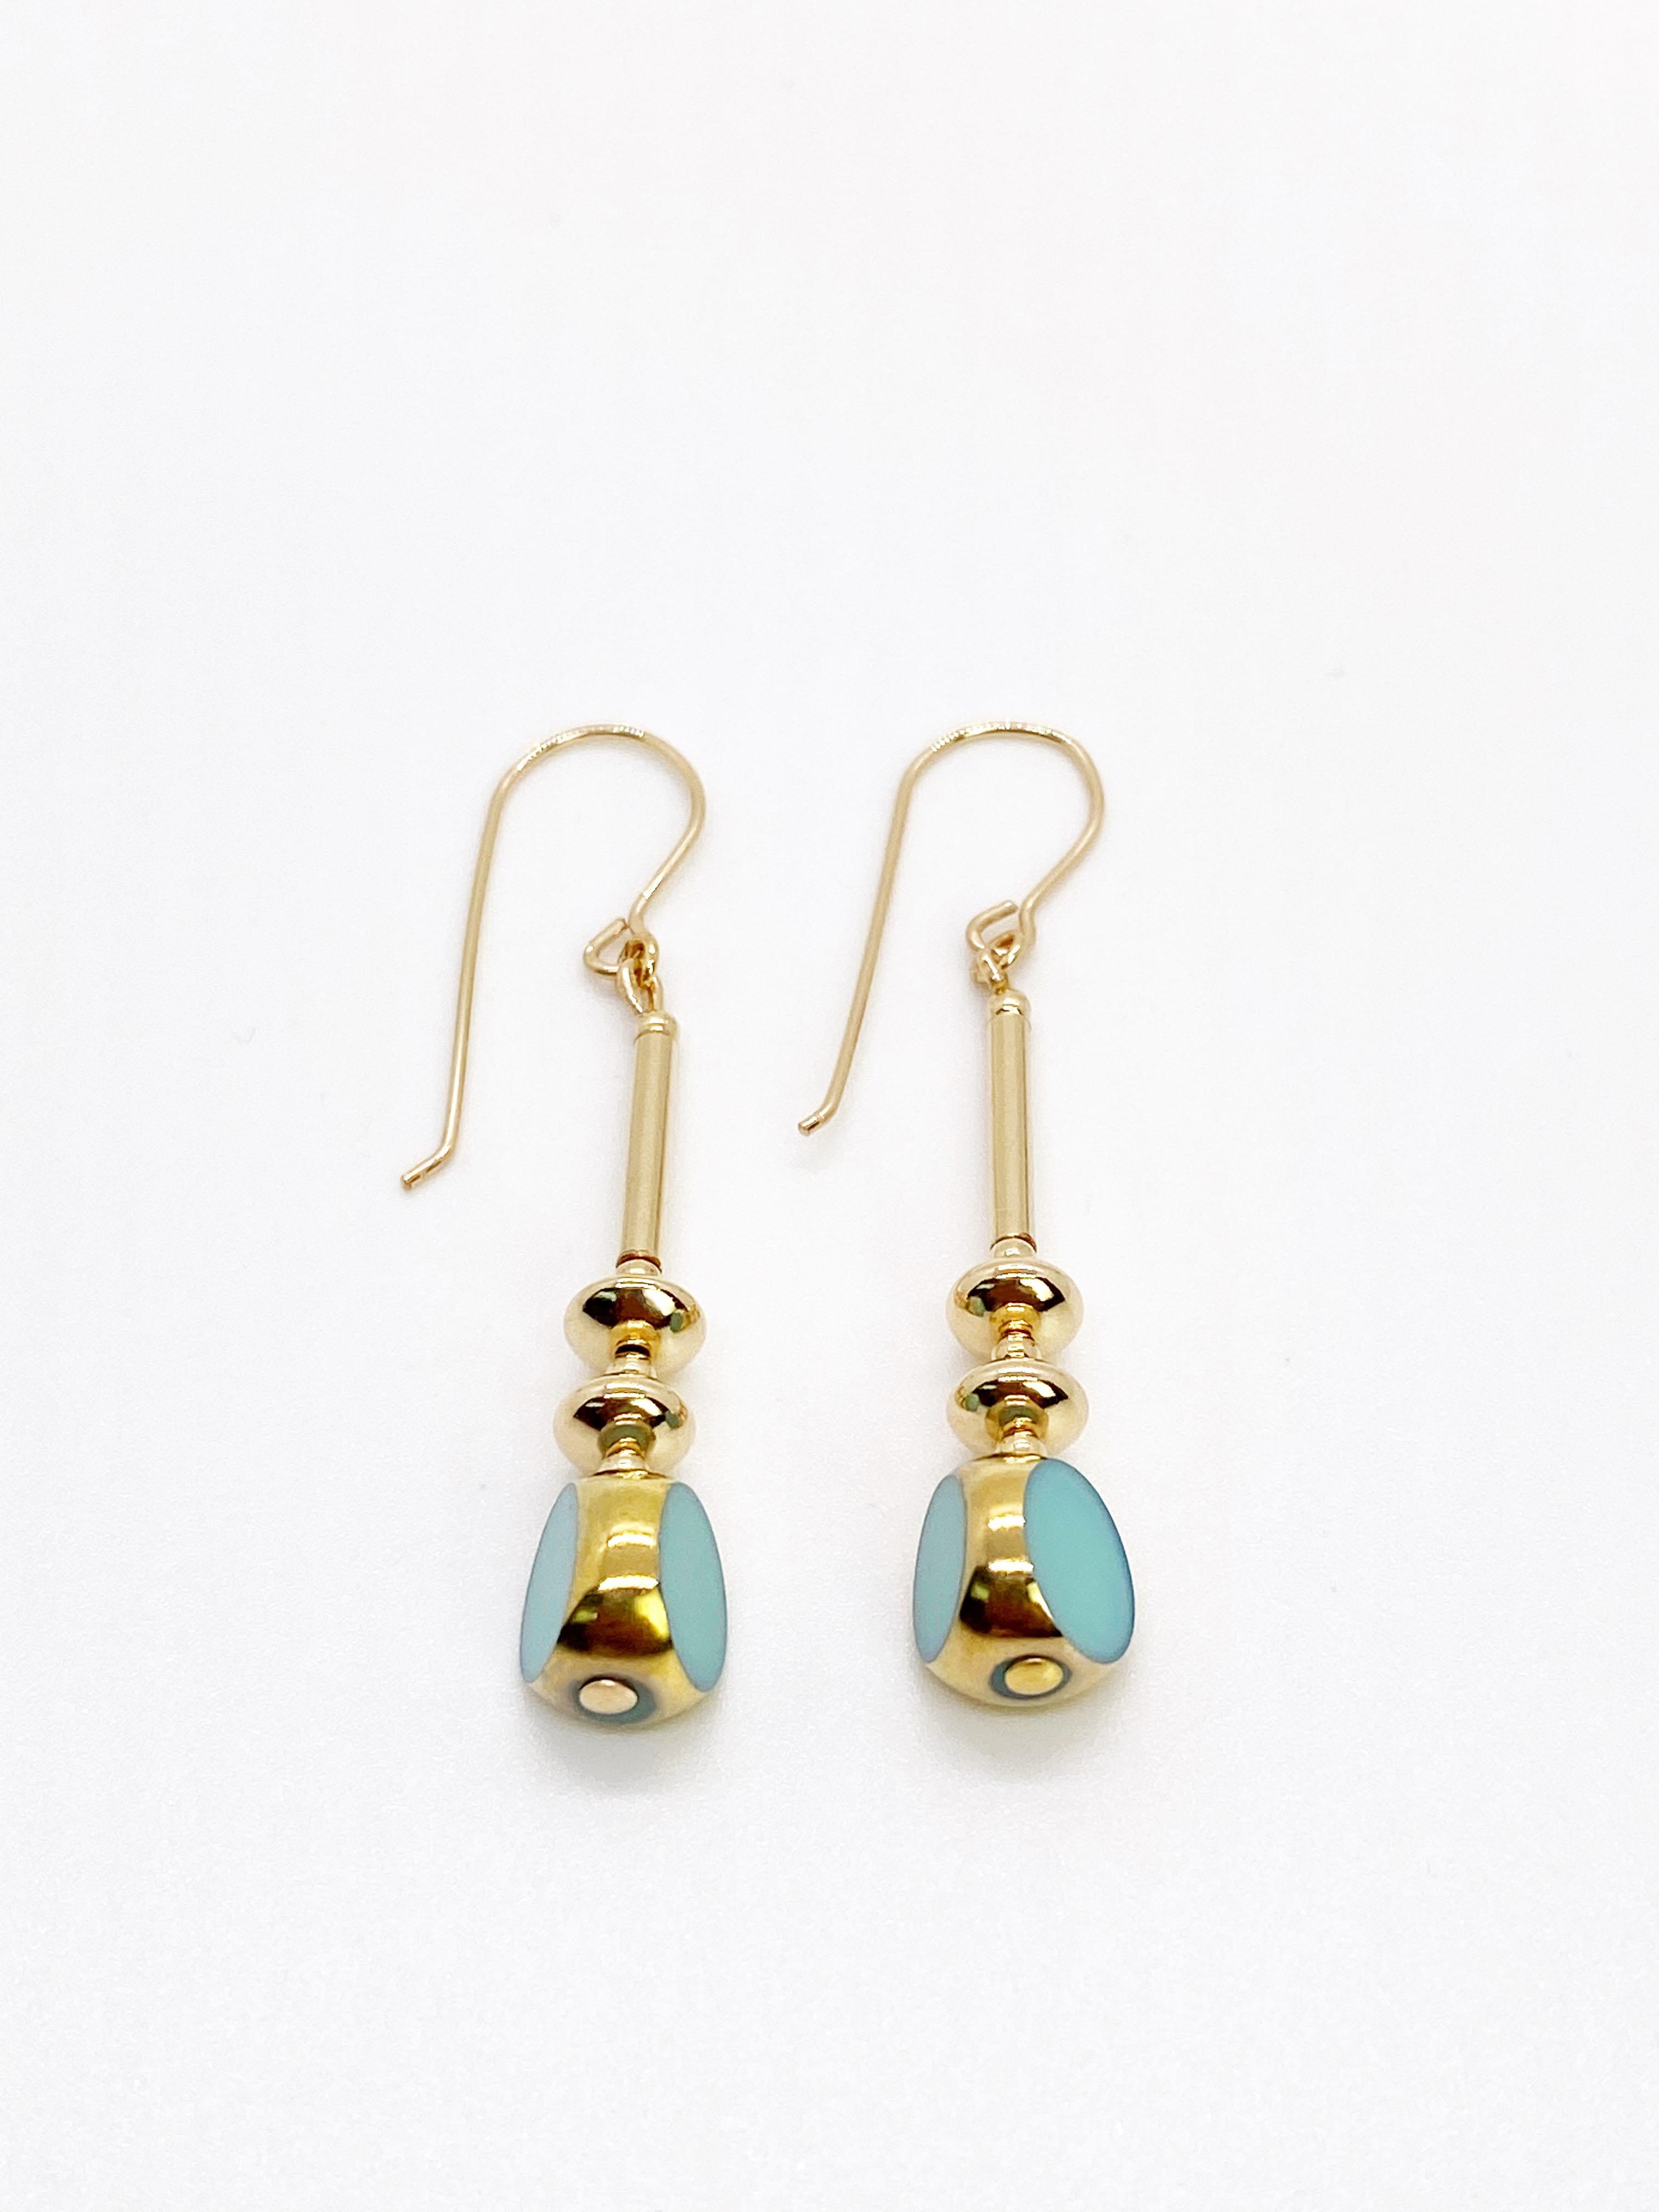 The earrings each consist of 1 beautiful opaque Sea Foam Blue colored window glass beads. The German vintage glass beads that are framed with 24K gold along with gold filled metal beads and wires.

The vintage German glass beads were hand pressed